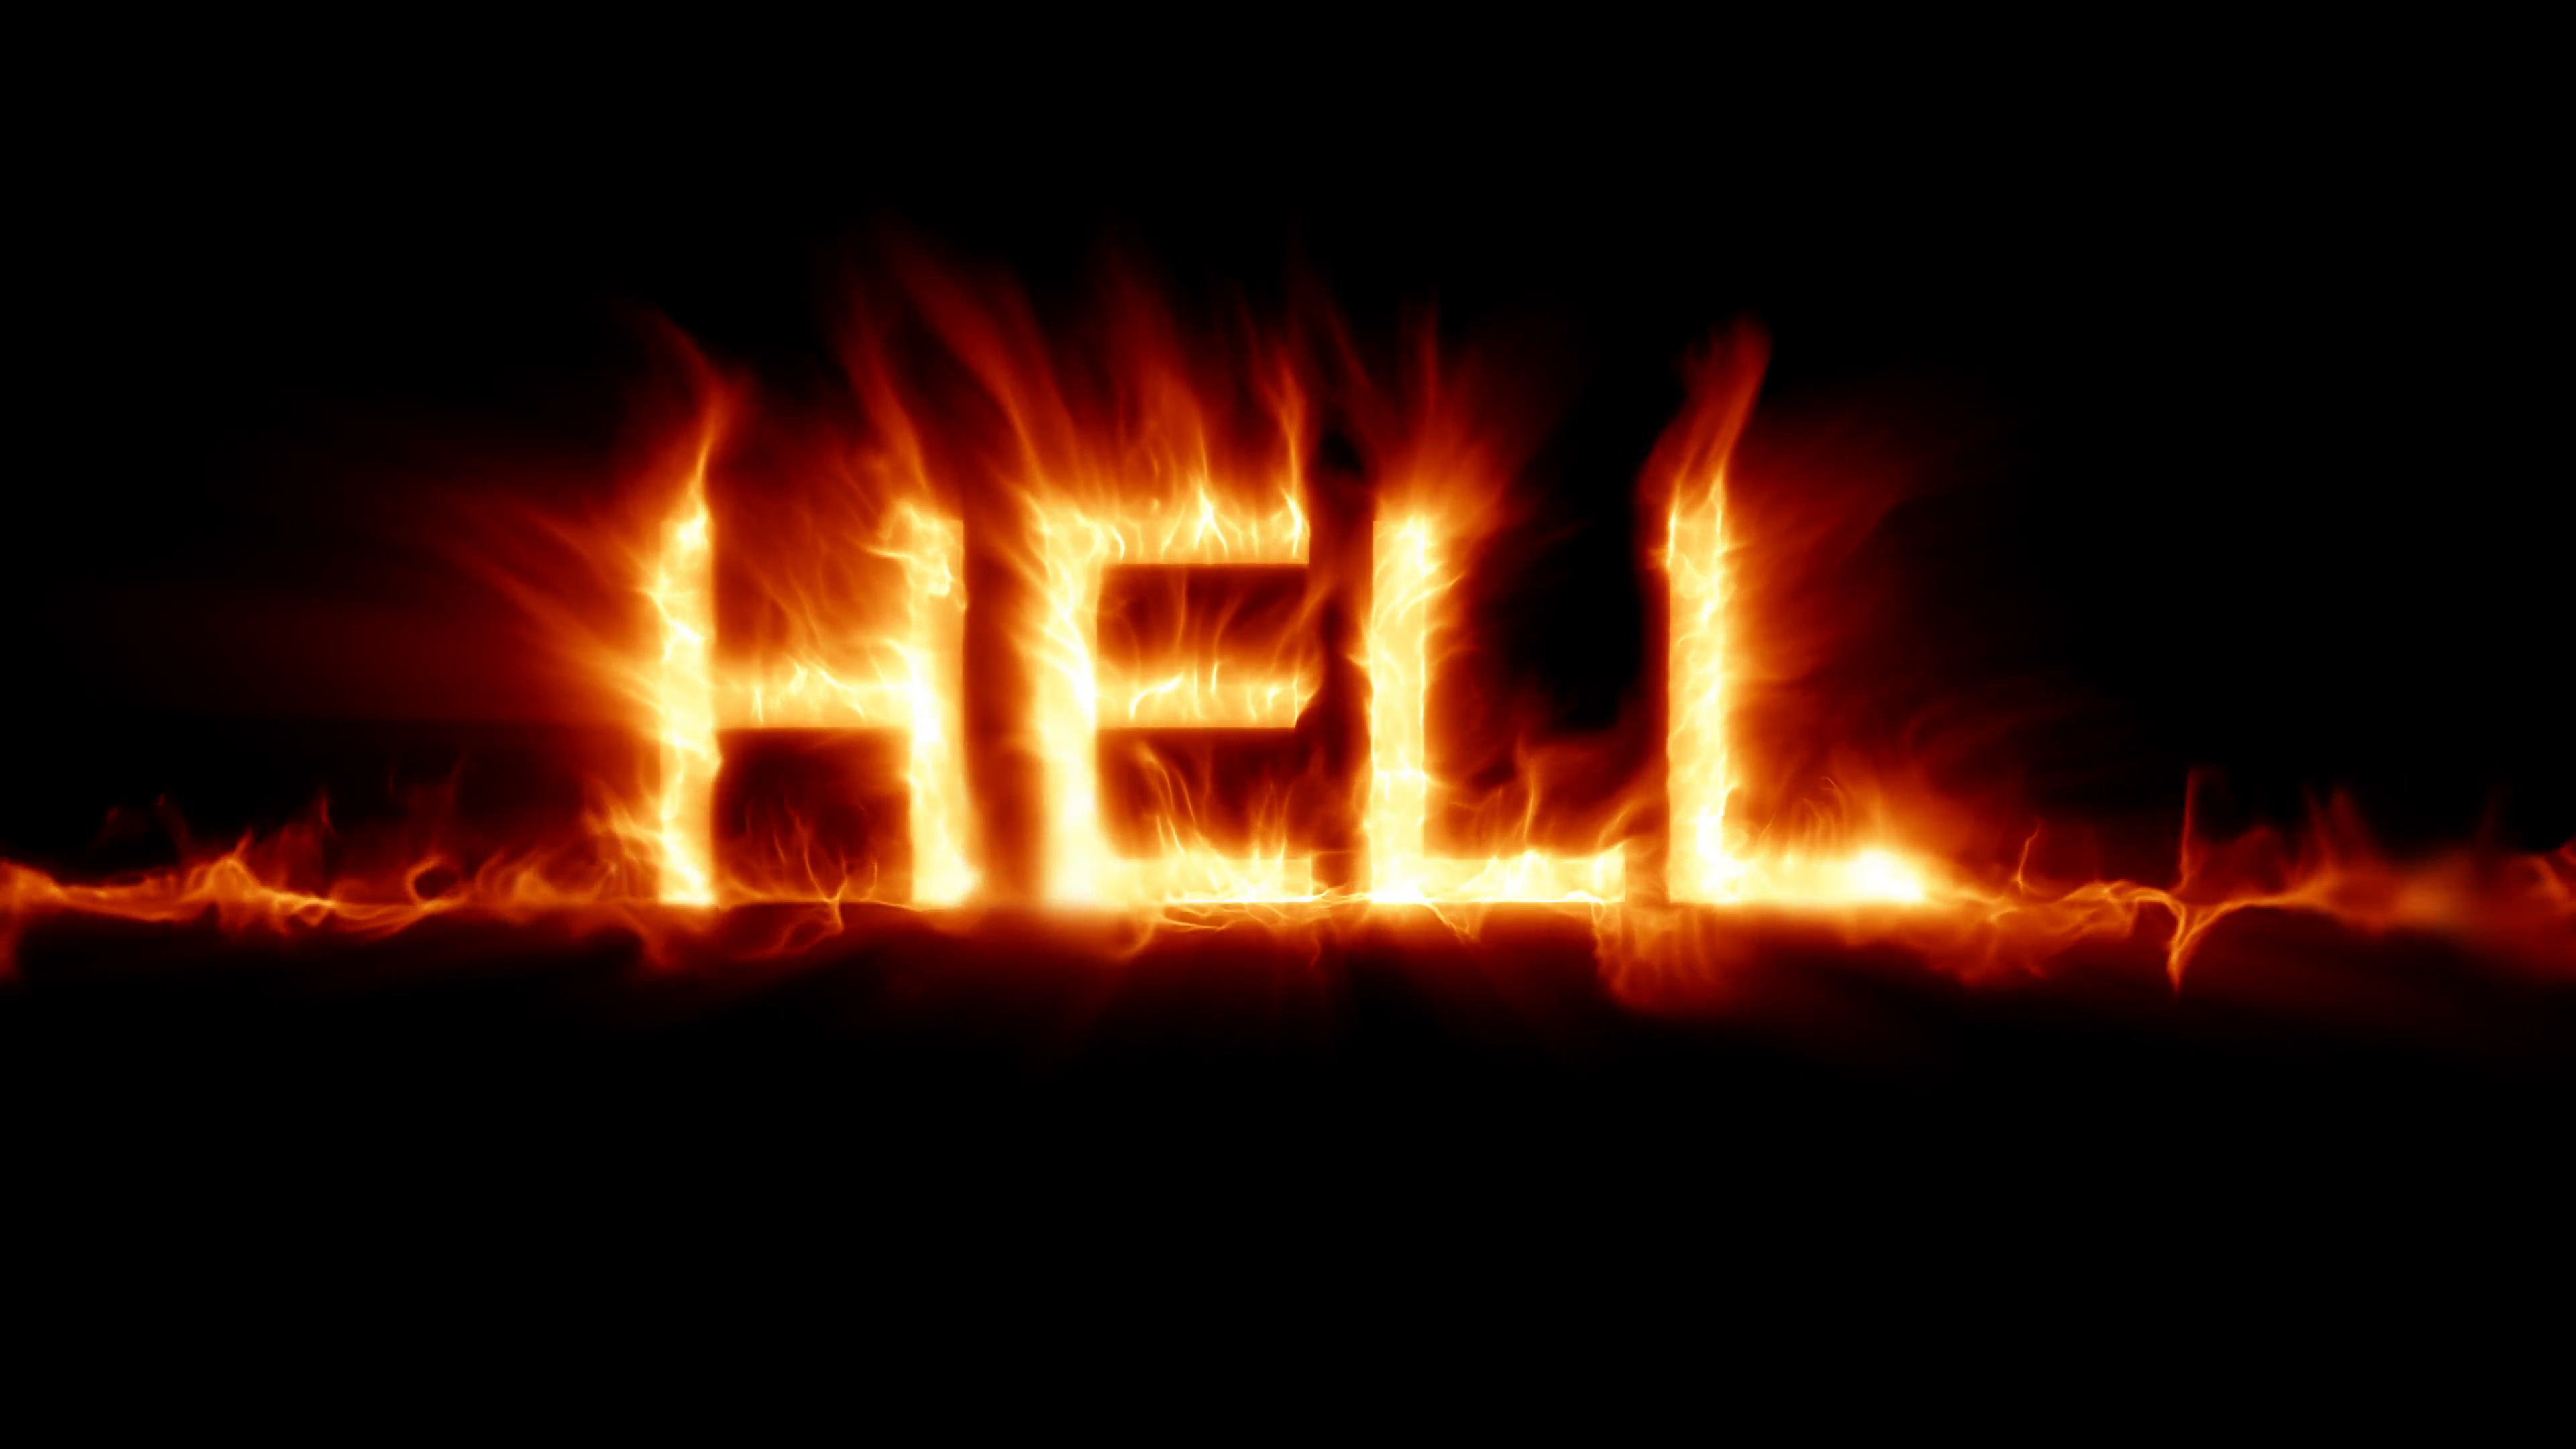 /hell_l0ve